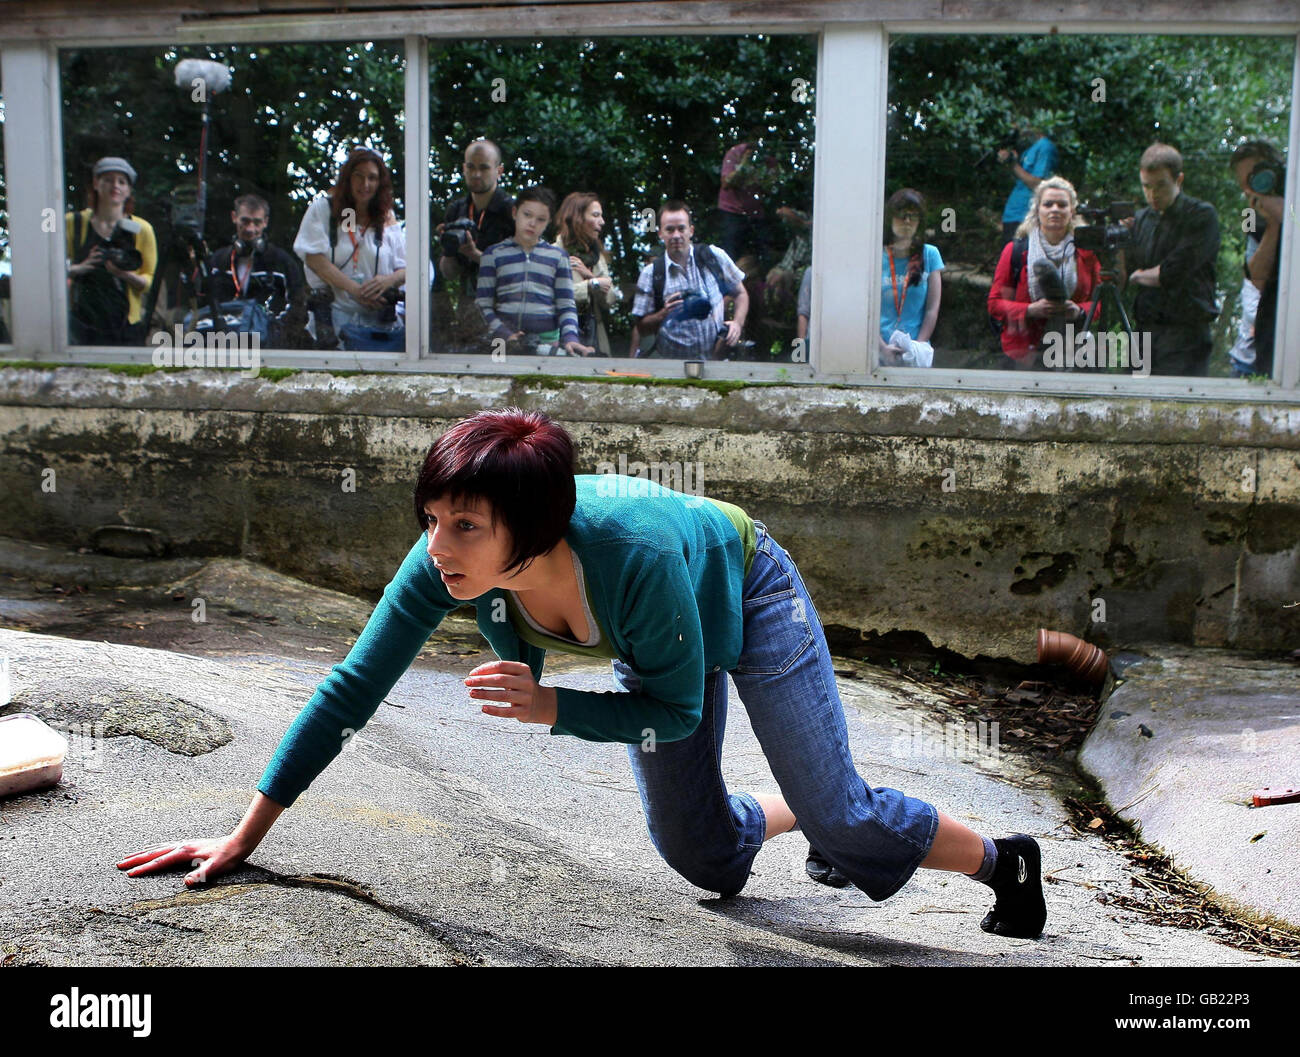 Performers from the Janis Claxton Dance group take part in 'Enclosure 44 - Humans' at Edinburgh Zoo. The Performance event, part of the Dancing Base Fringe Festival, is to highlight the connections between humans and animals, and runs from 5th to 16th August. Stock Photo